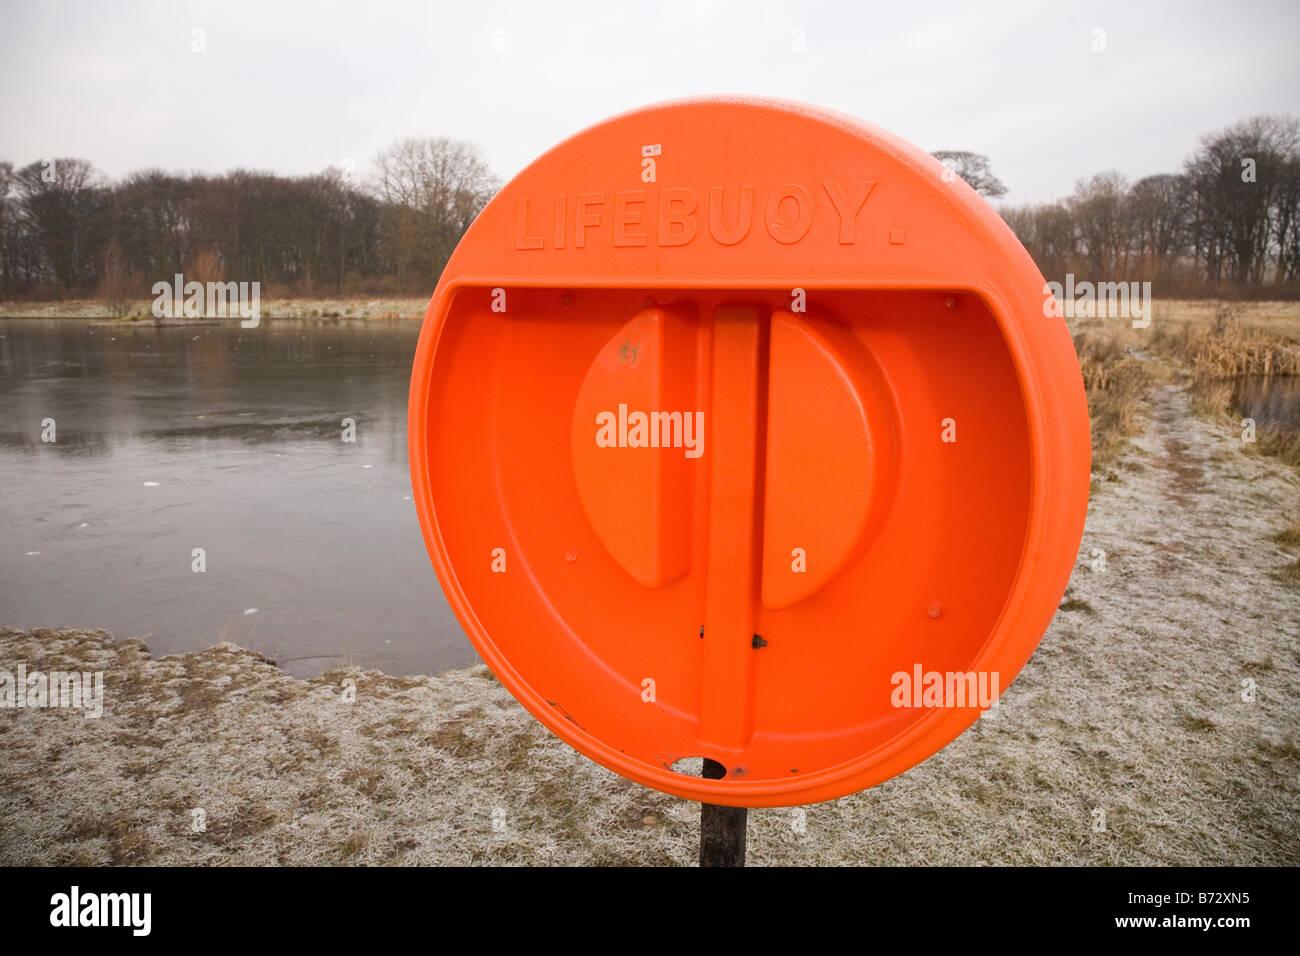 A life buoy holder stands empty in Herrington Country Park in Sunderland, England. Stock Photo